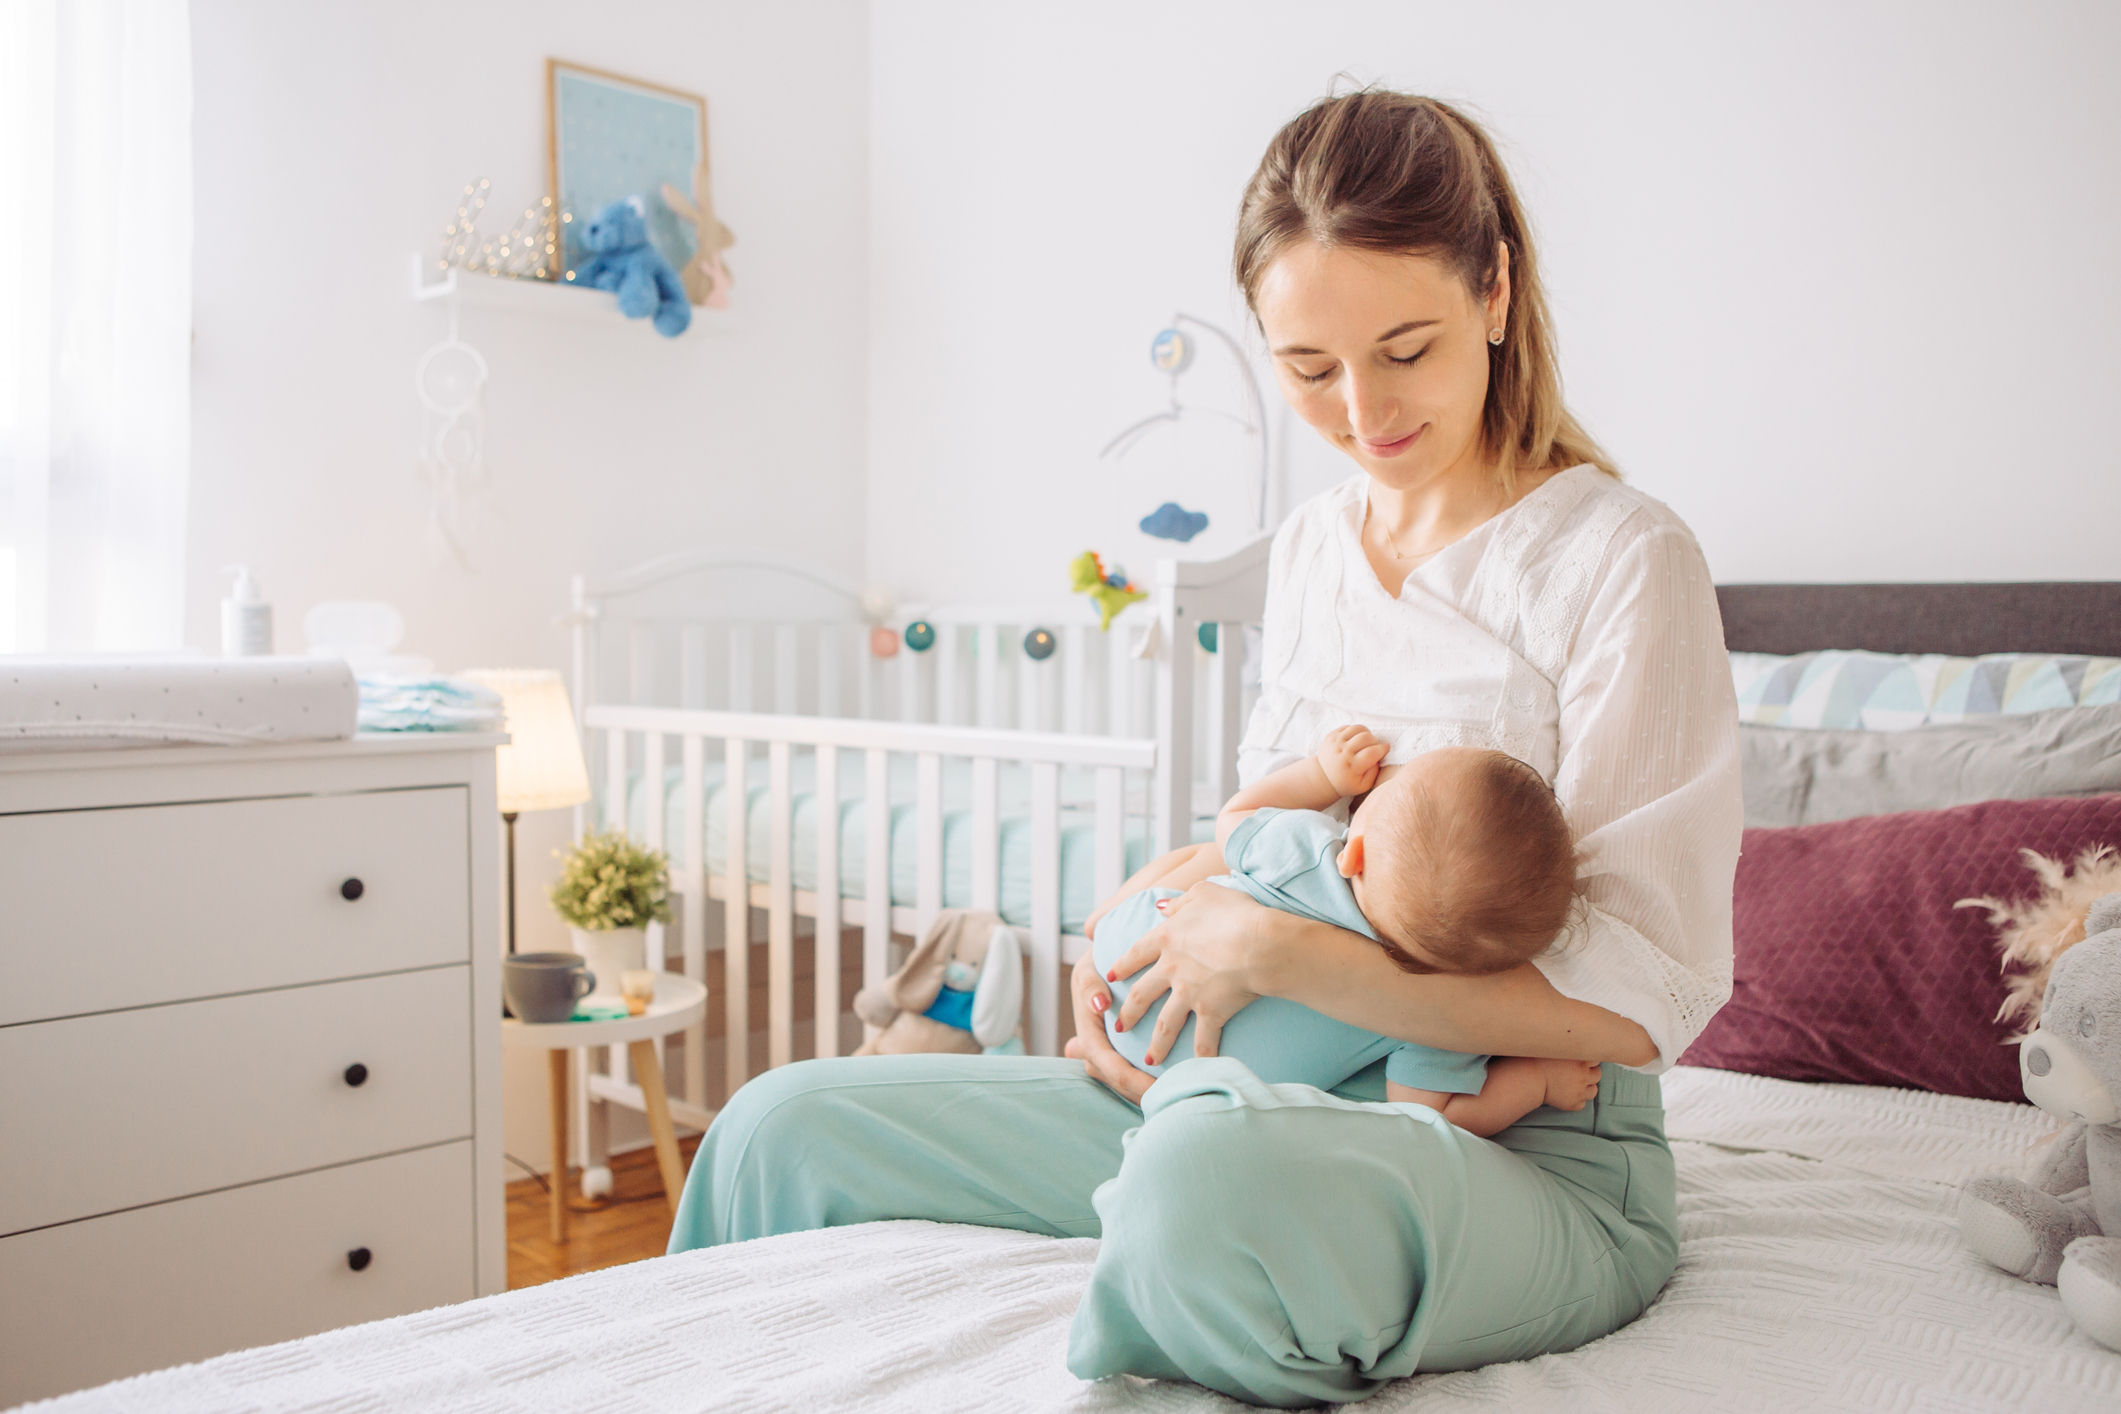 A young mom breastfeeds her baby in the nursery of her home